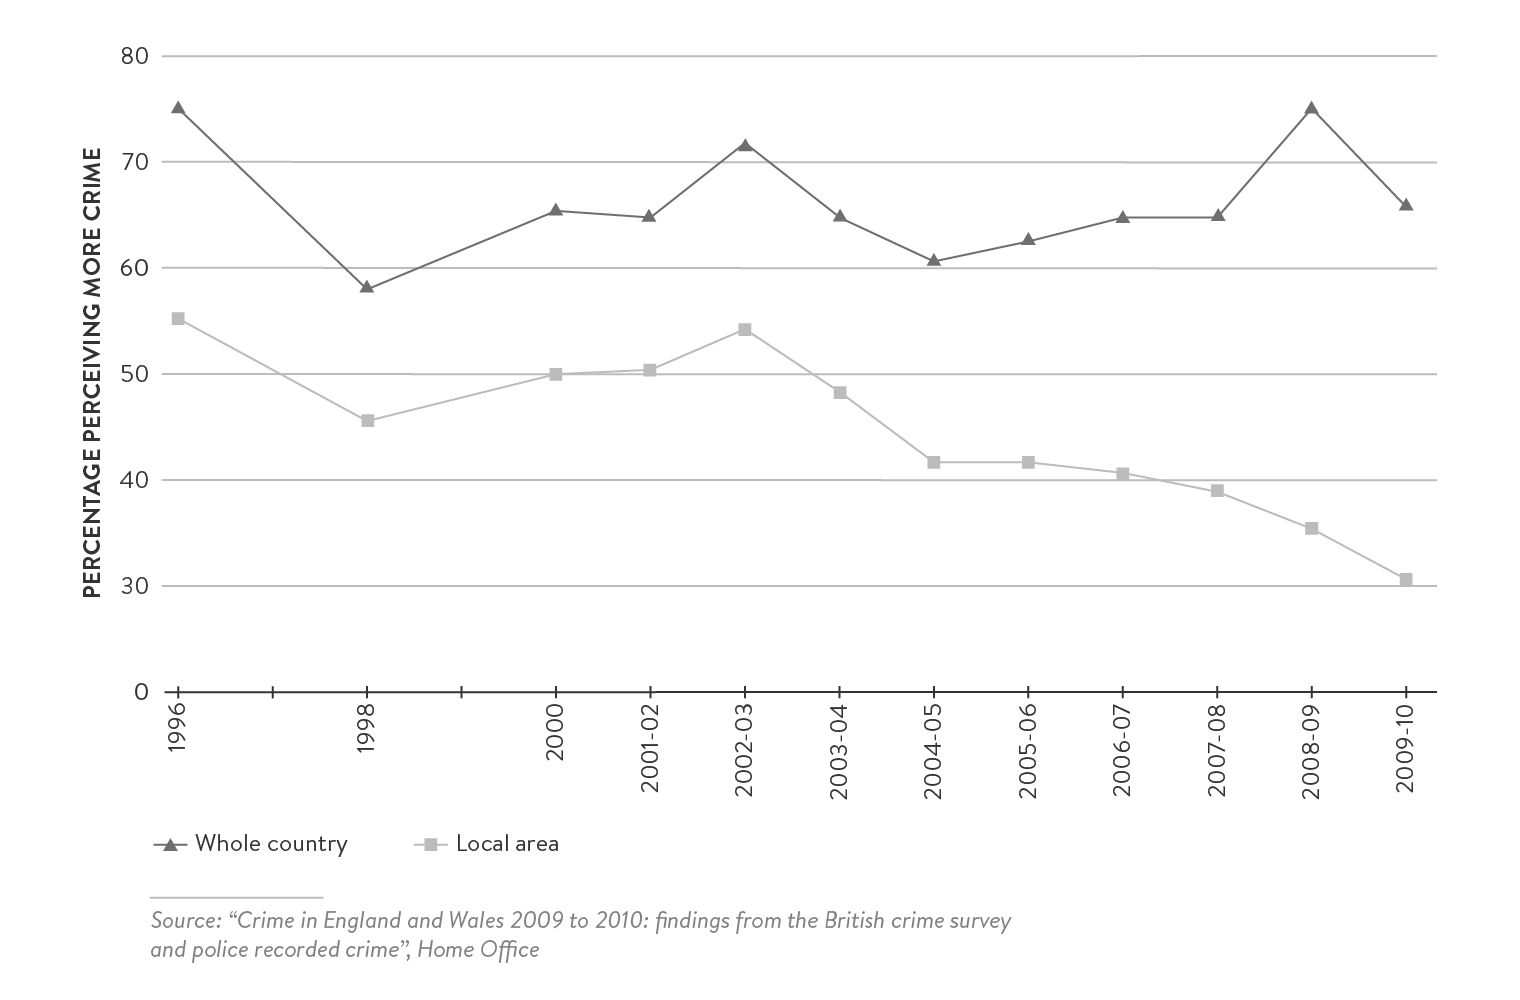 new-labours-domestic-policies-neoliberal-social-democratic-or-unique-blend - Figure 10: Perceptions of Changing Crime Levels in England and Wales, 1996–2010